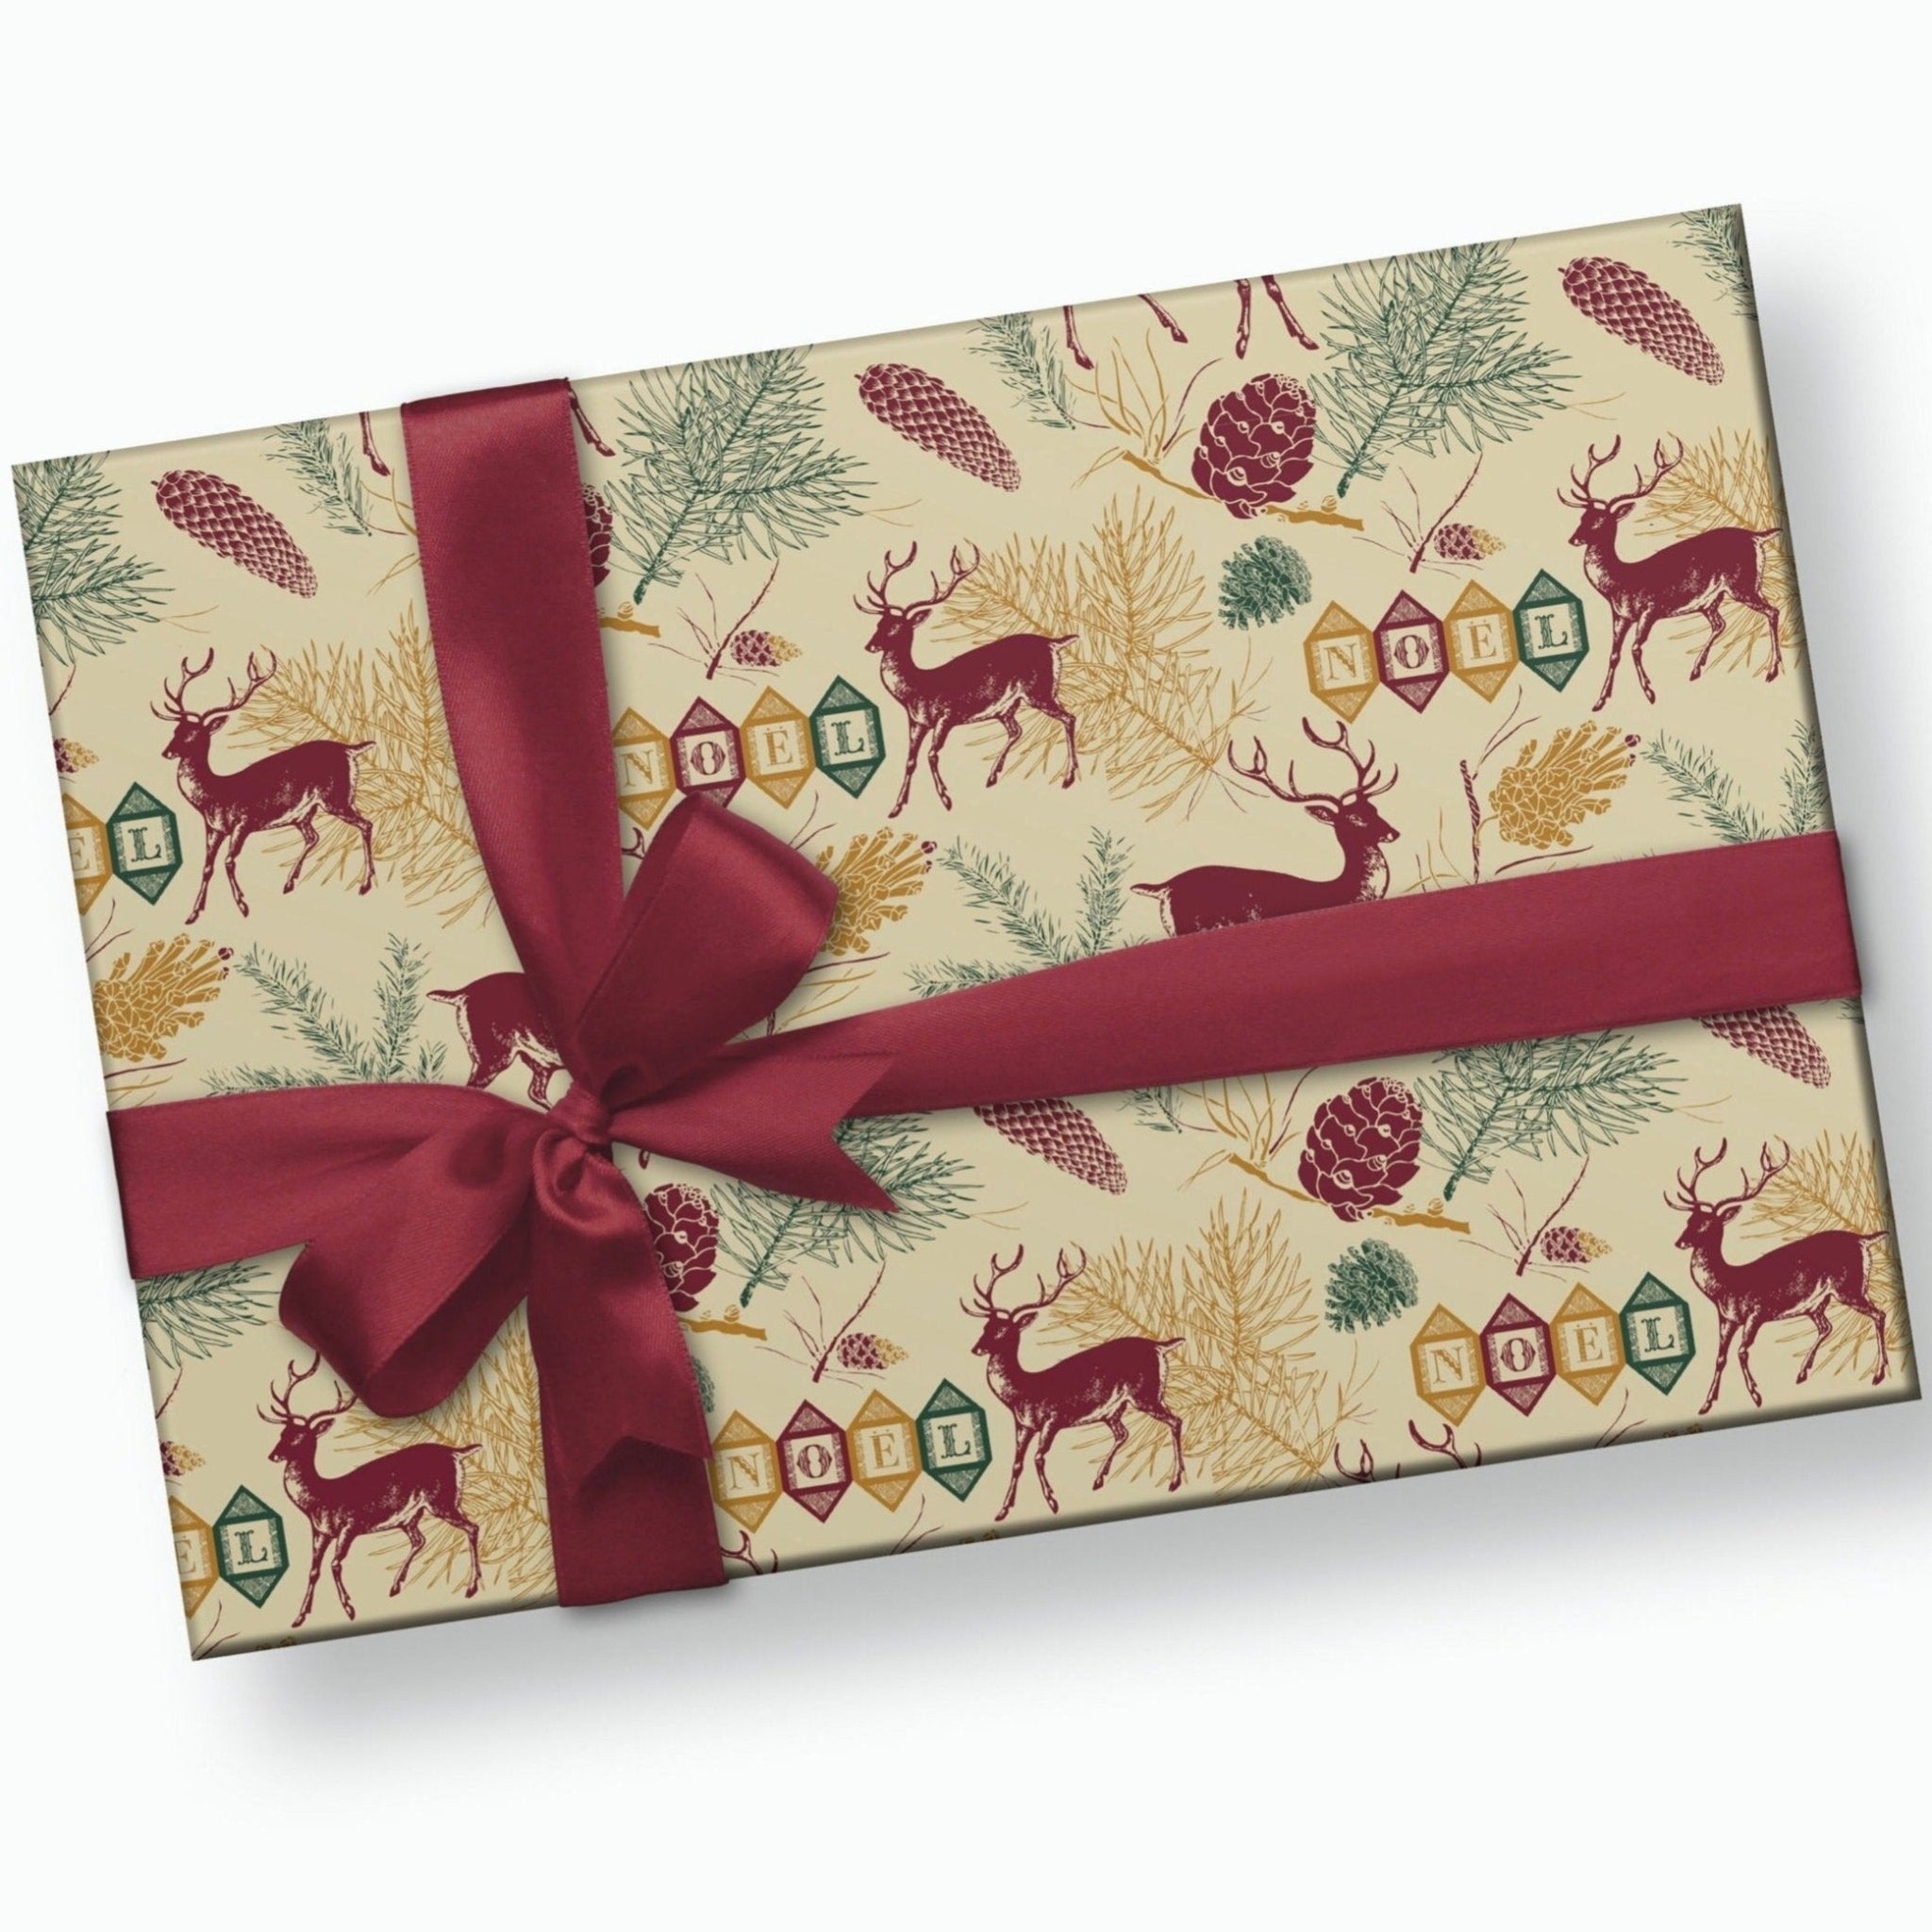 Red Truck Christmas Wrapping Paper - Stesha Party - christmas